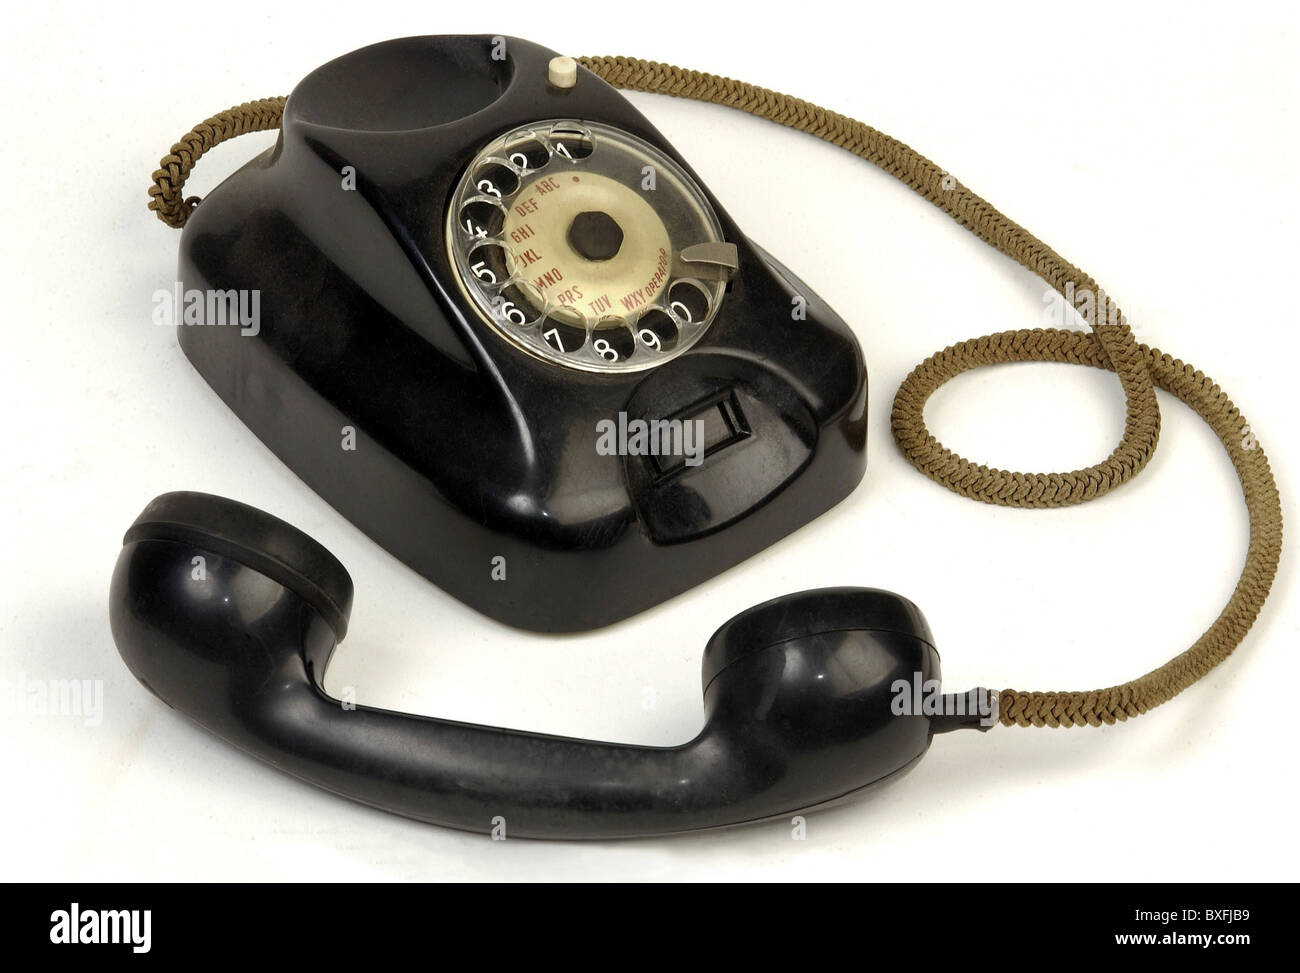 technics, telephone, Siemens telephone, bakelite, Germany, 1950s, 50s, 20th century, historic, historical, extension, direct dialing, direct dialling, device, devices, physical device, desk telephone, desk telephones, telephone receiver, telephone receivers, fixed-line network, landline network, busy, engaged, Made in Germany, clipping, cut out, cut-out, cut-outs, Additional-Rights-Clearences-Not Available Stock Photo